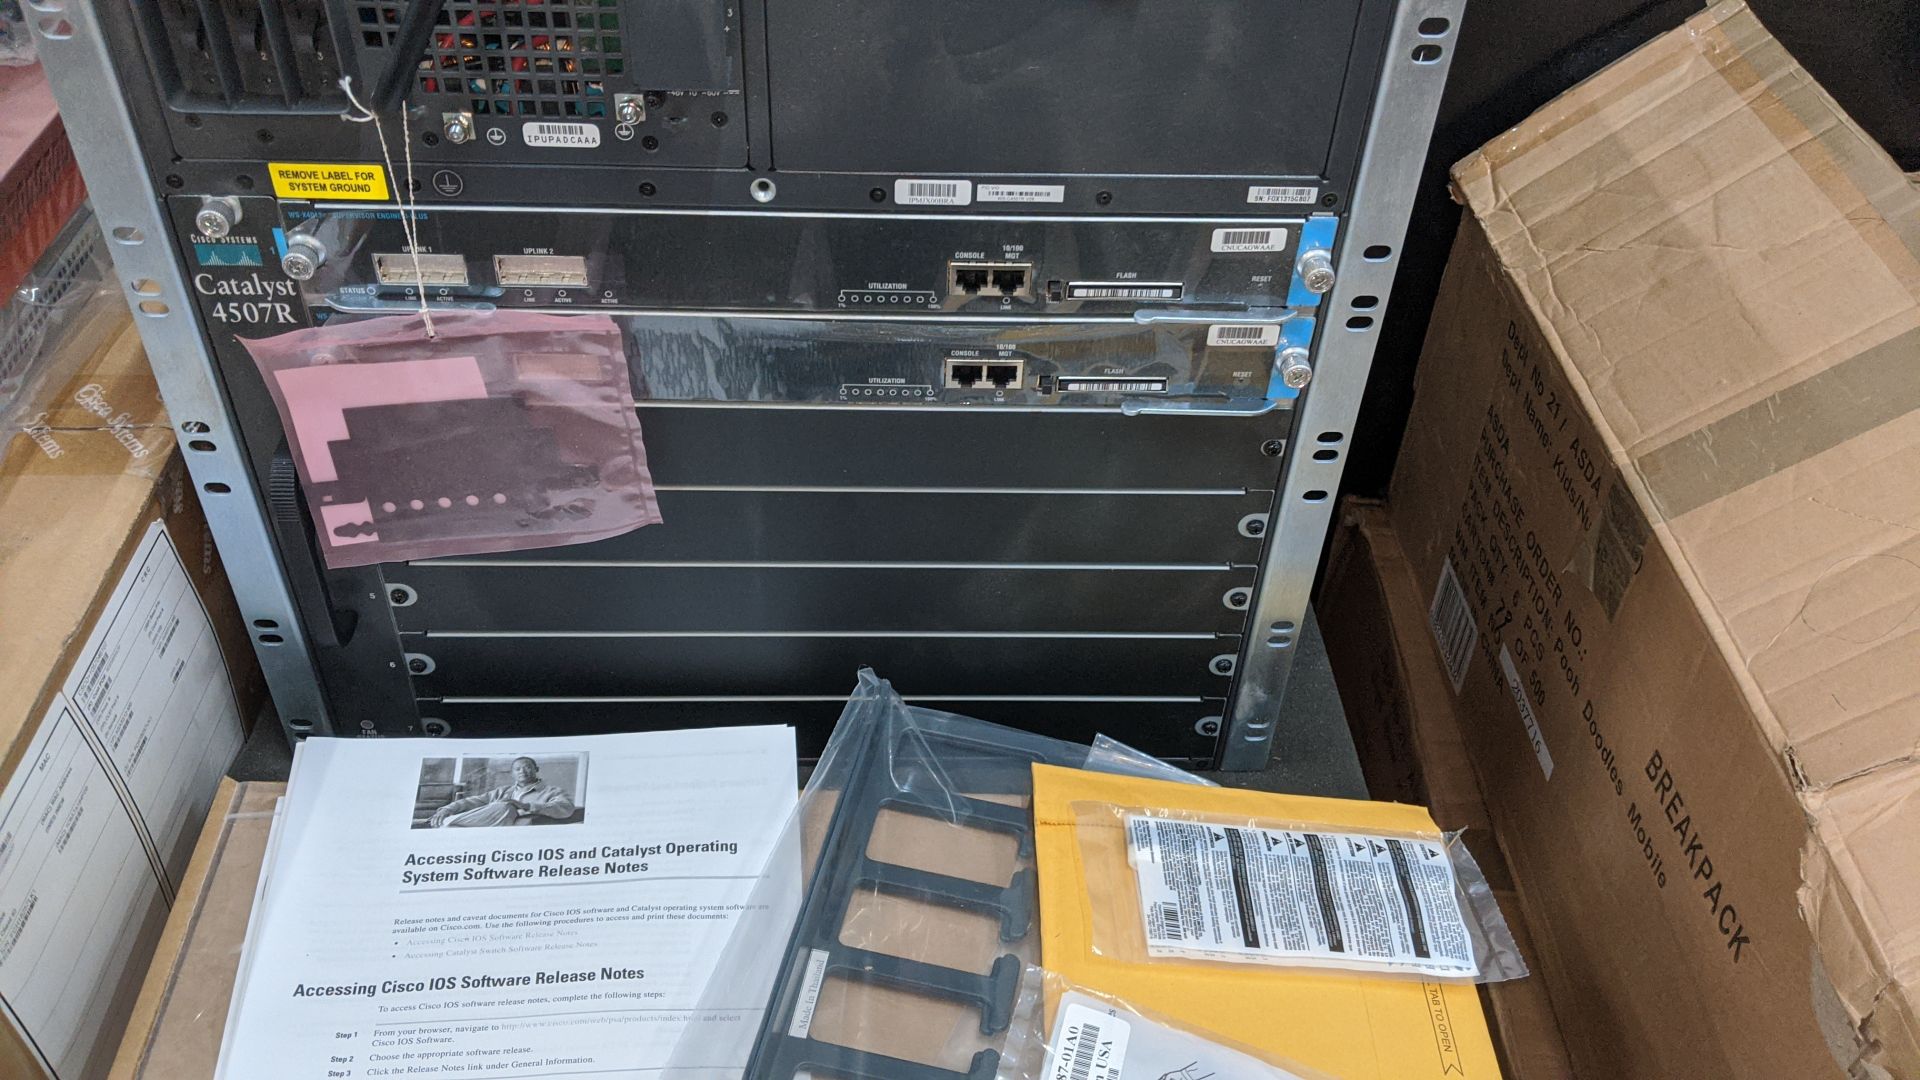 Cisco WS-C4500 series catalyst 4507R large heavy duty rack mountable switch. This is one of a - Image 5 of 11